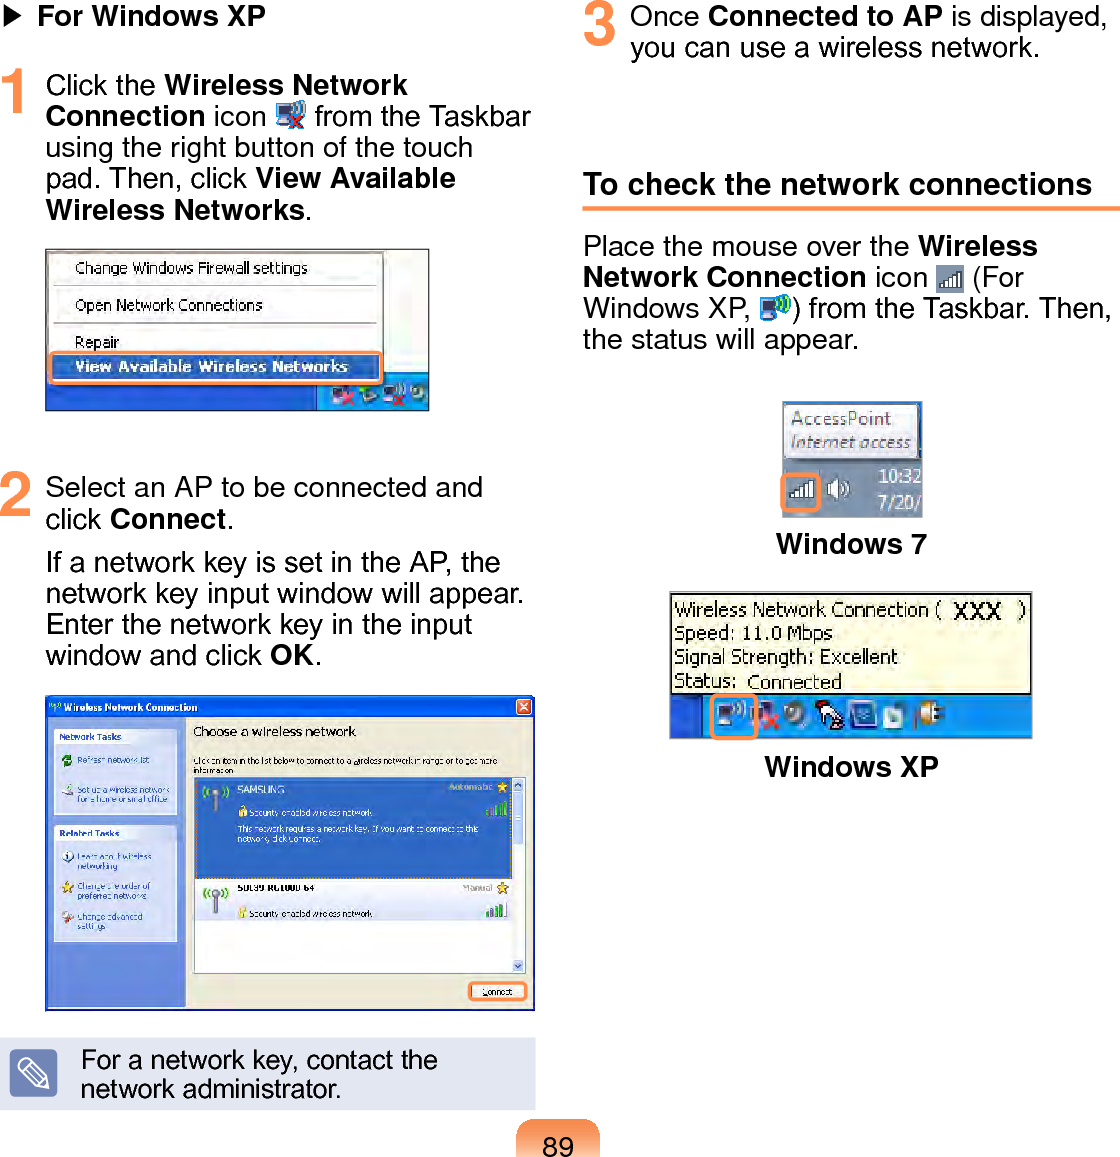 89▶ For Windows XP1  Click the Wireless Network Connection icon   from the Taskbar using the right button of the touch pad. Then, click View Available Wireless Networks.2  Select an AP to be connected and click Connect.If a network key is set in the AP, the network key input window will appear. Enter the network key in the input window and click OK.For a network key, contact the network administrator.3  Once Connected to AP is displayed, you can use a wireless network.To check the network connectionsPlace the mouse over the Wireless Network Connection icon   (For Windows XP,  ) from the Taskbar. Then, the status will appear.Windows 7Windows XP